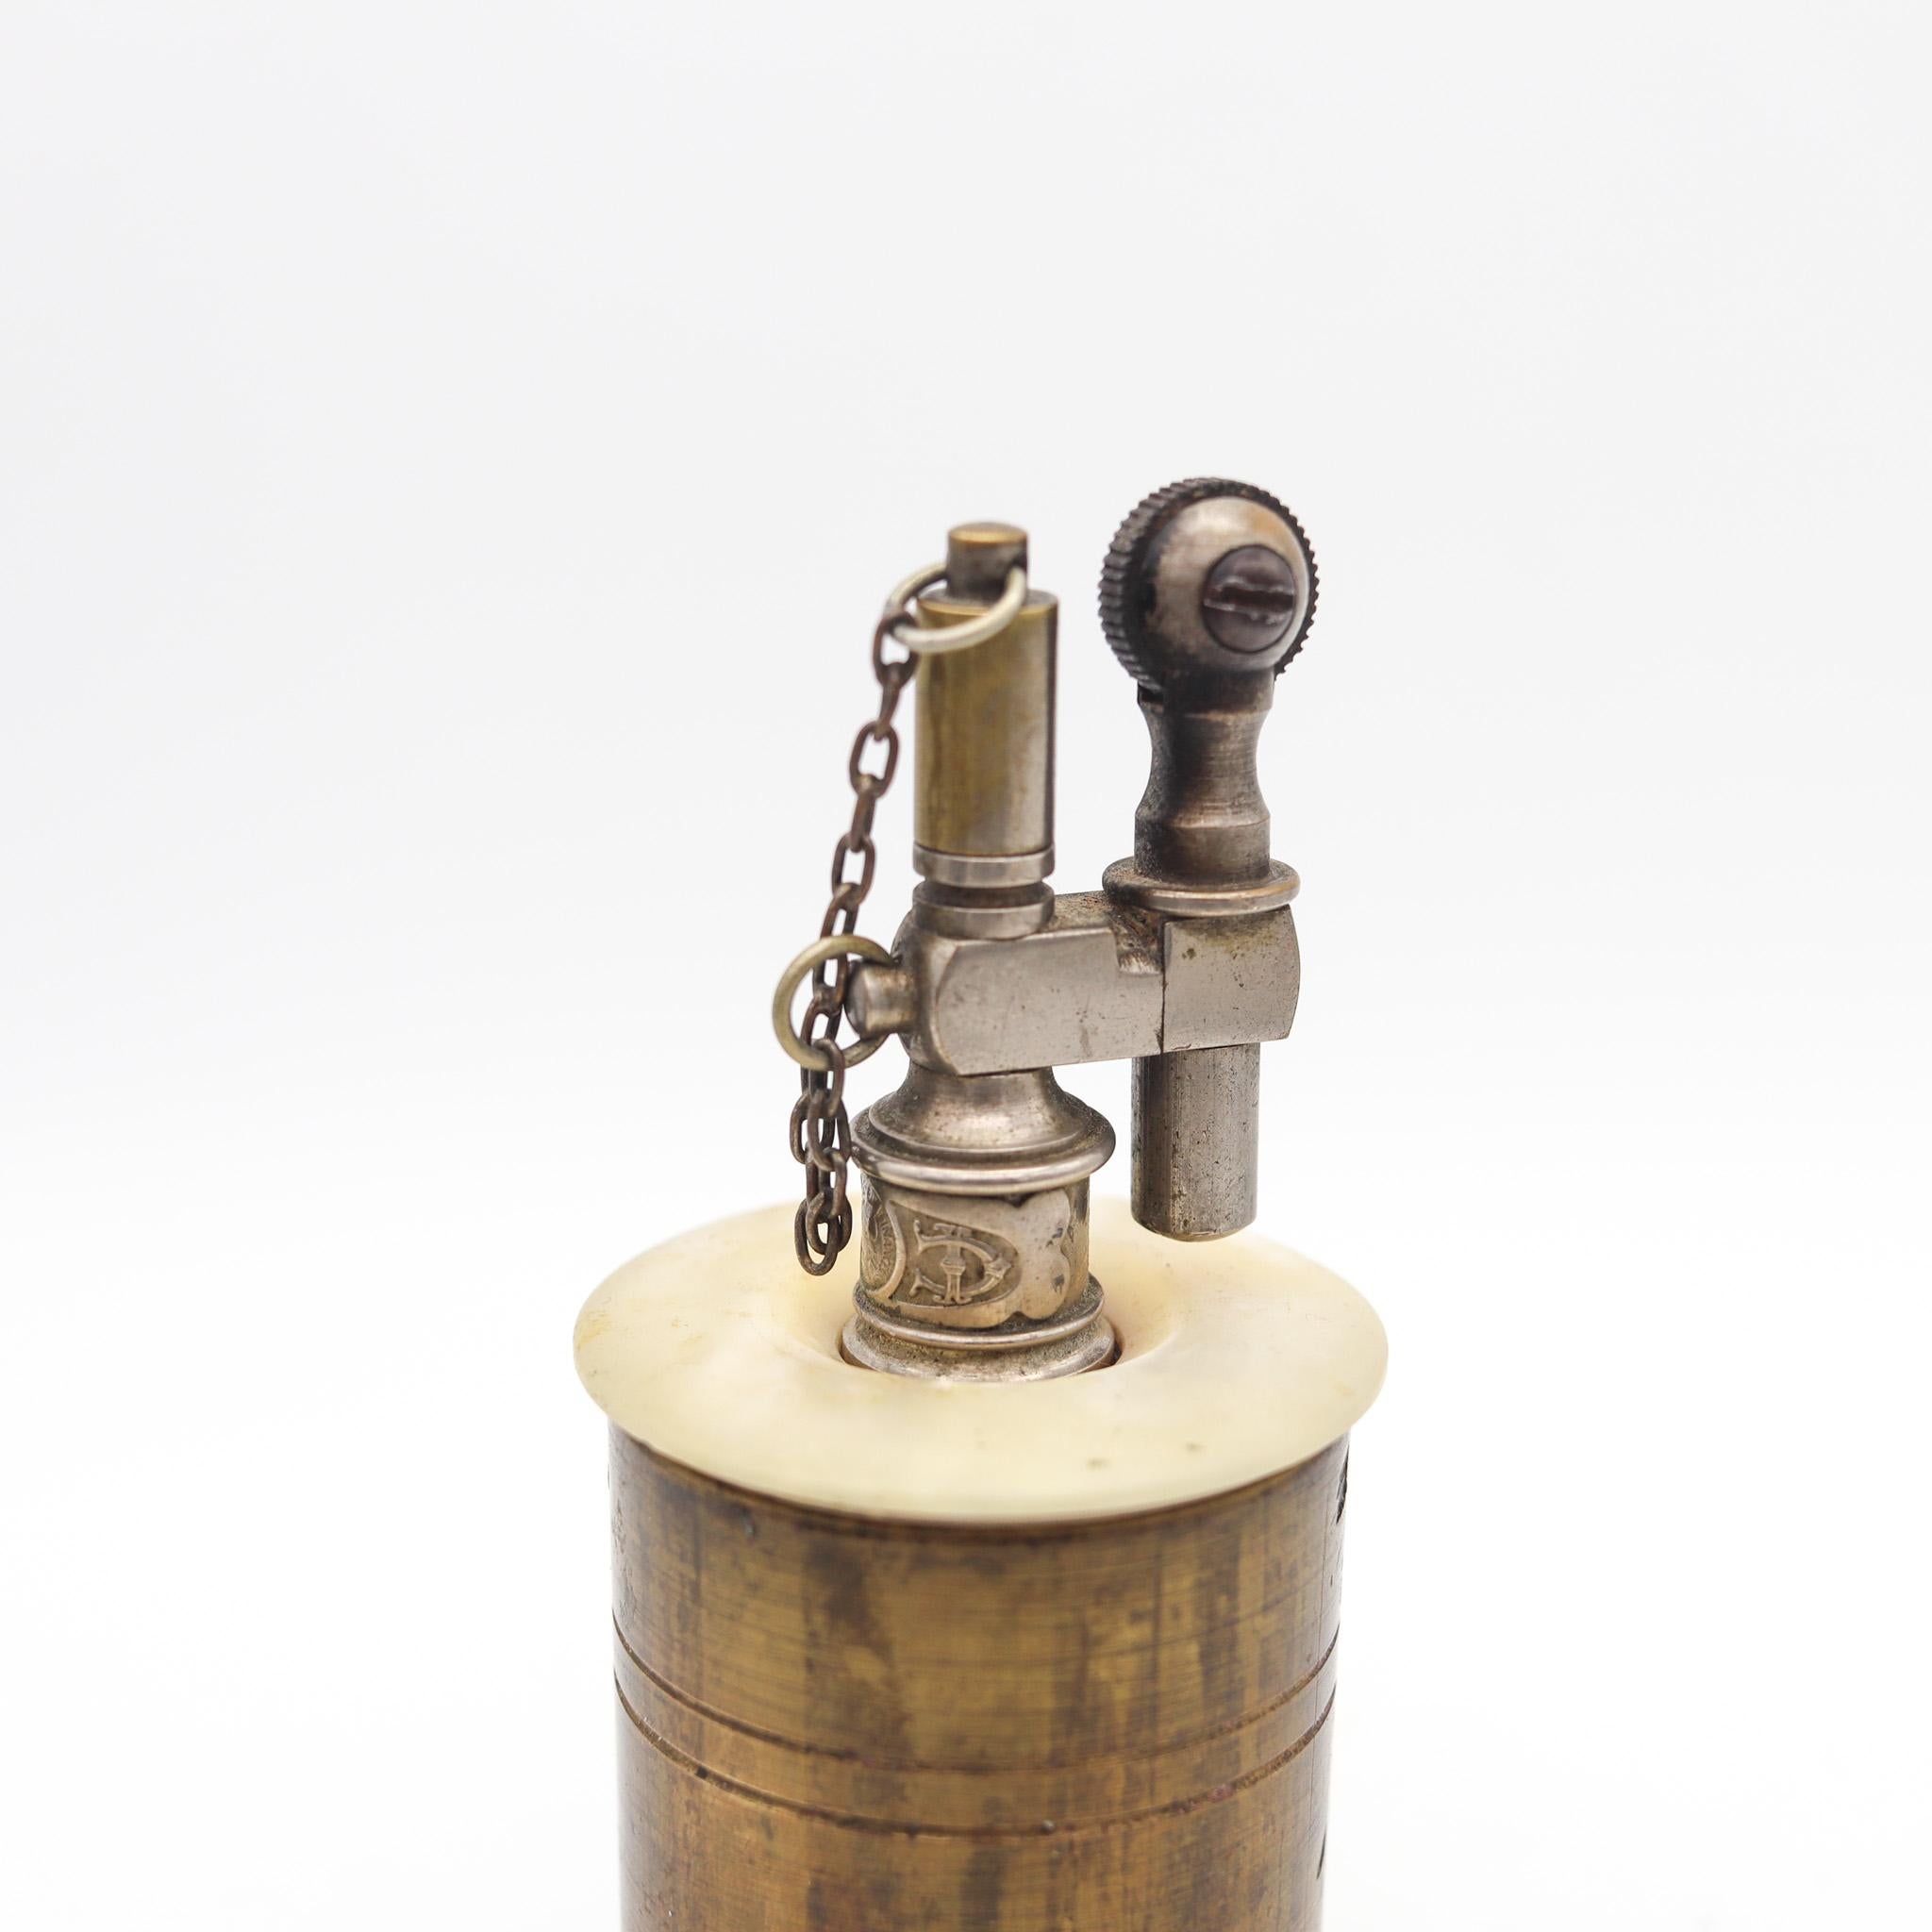 Table petrol lighter designed by Tiffany & Co.

Beautiful and unusual antique table petrol lighter, created in Paris France by the Tiffany & Co., back in the 1919. Crafted after the WWI as a trench-art piece in solid brass with high polished finish